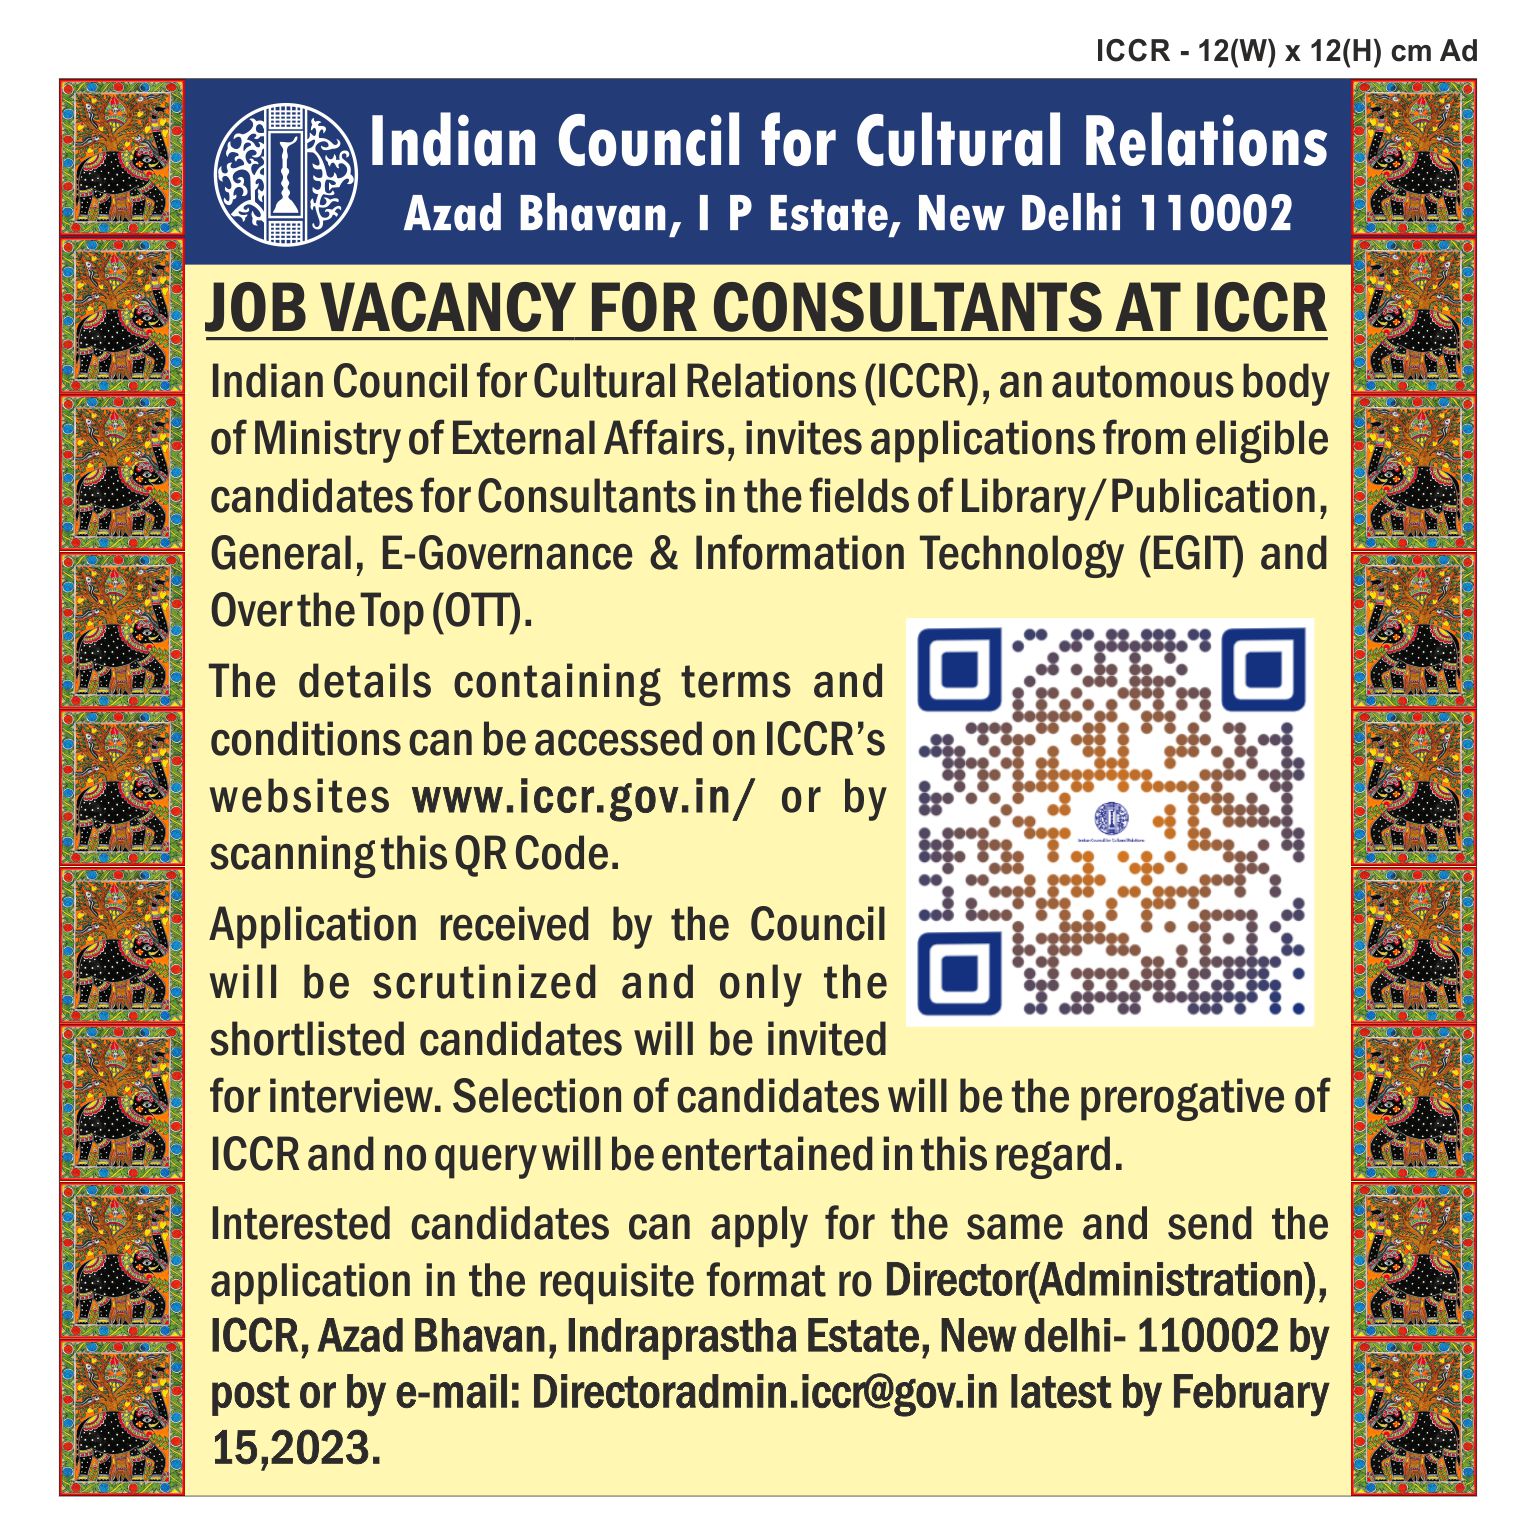 Advertisement for Hiring of Consultants in ICCR